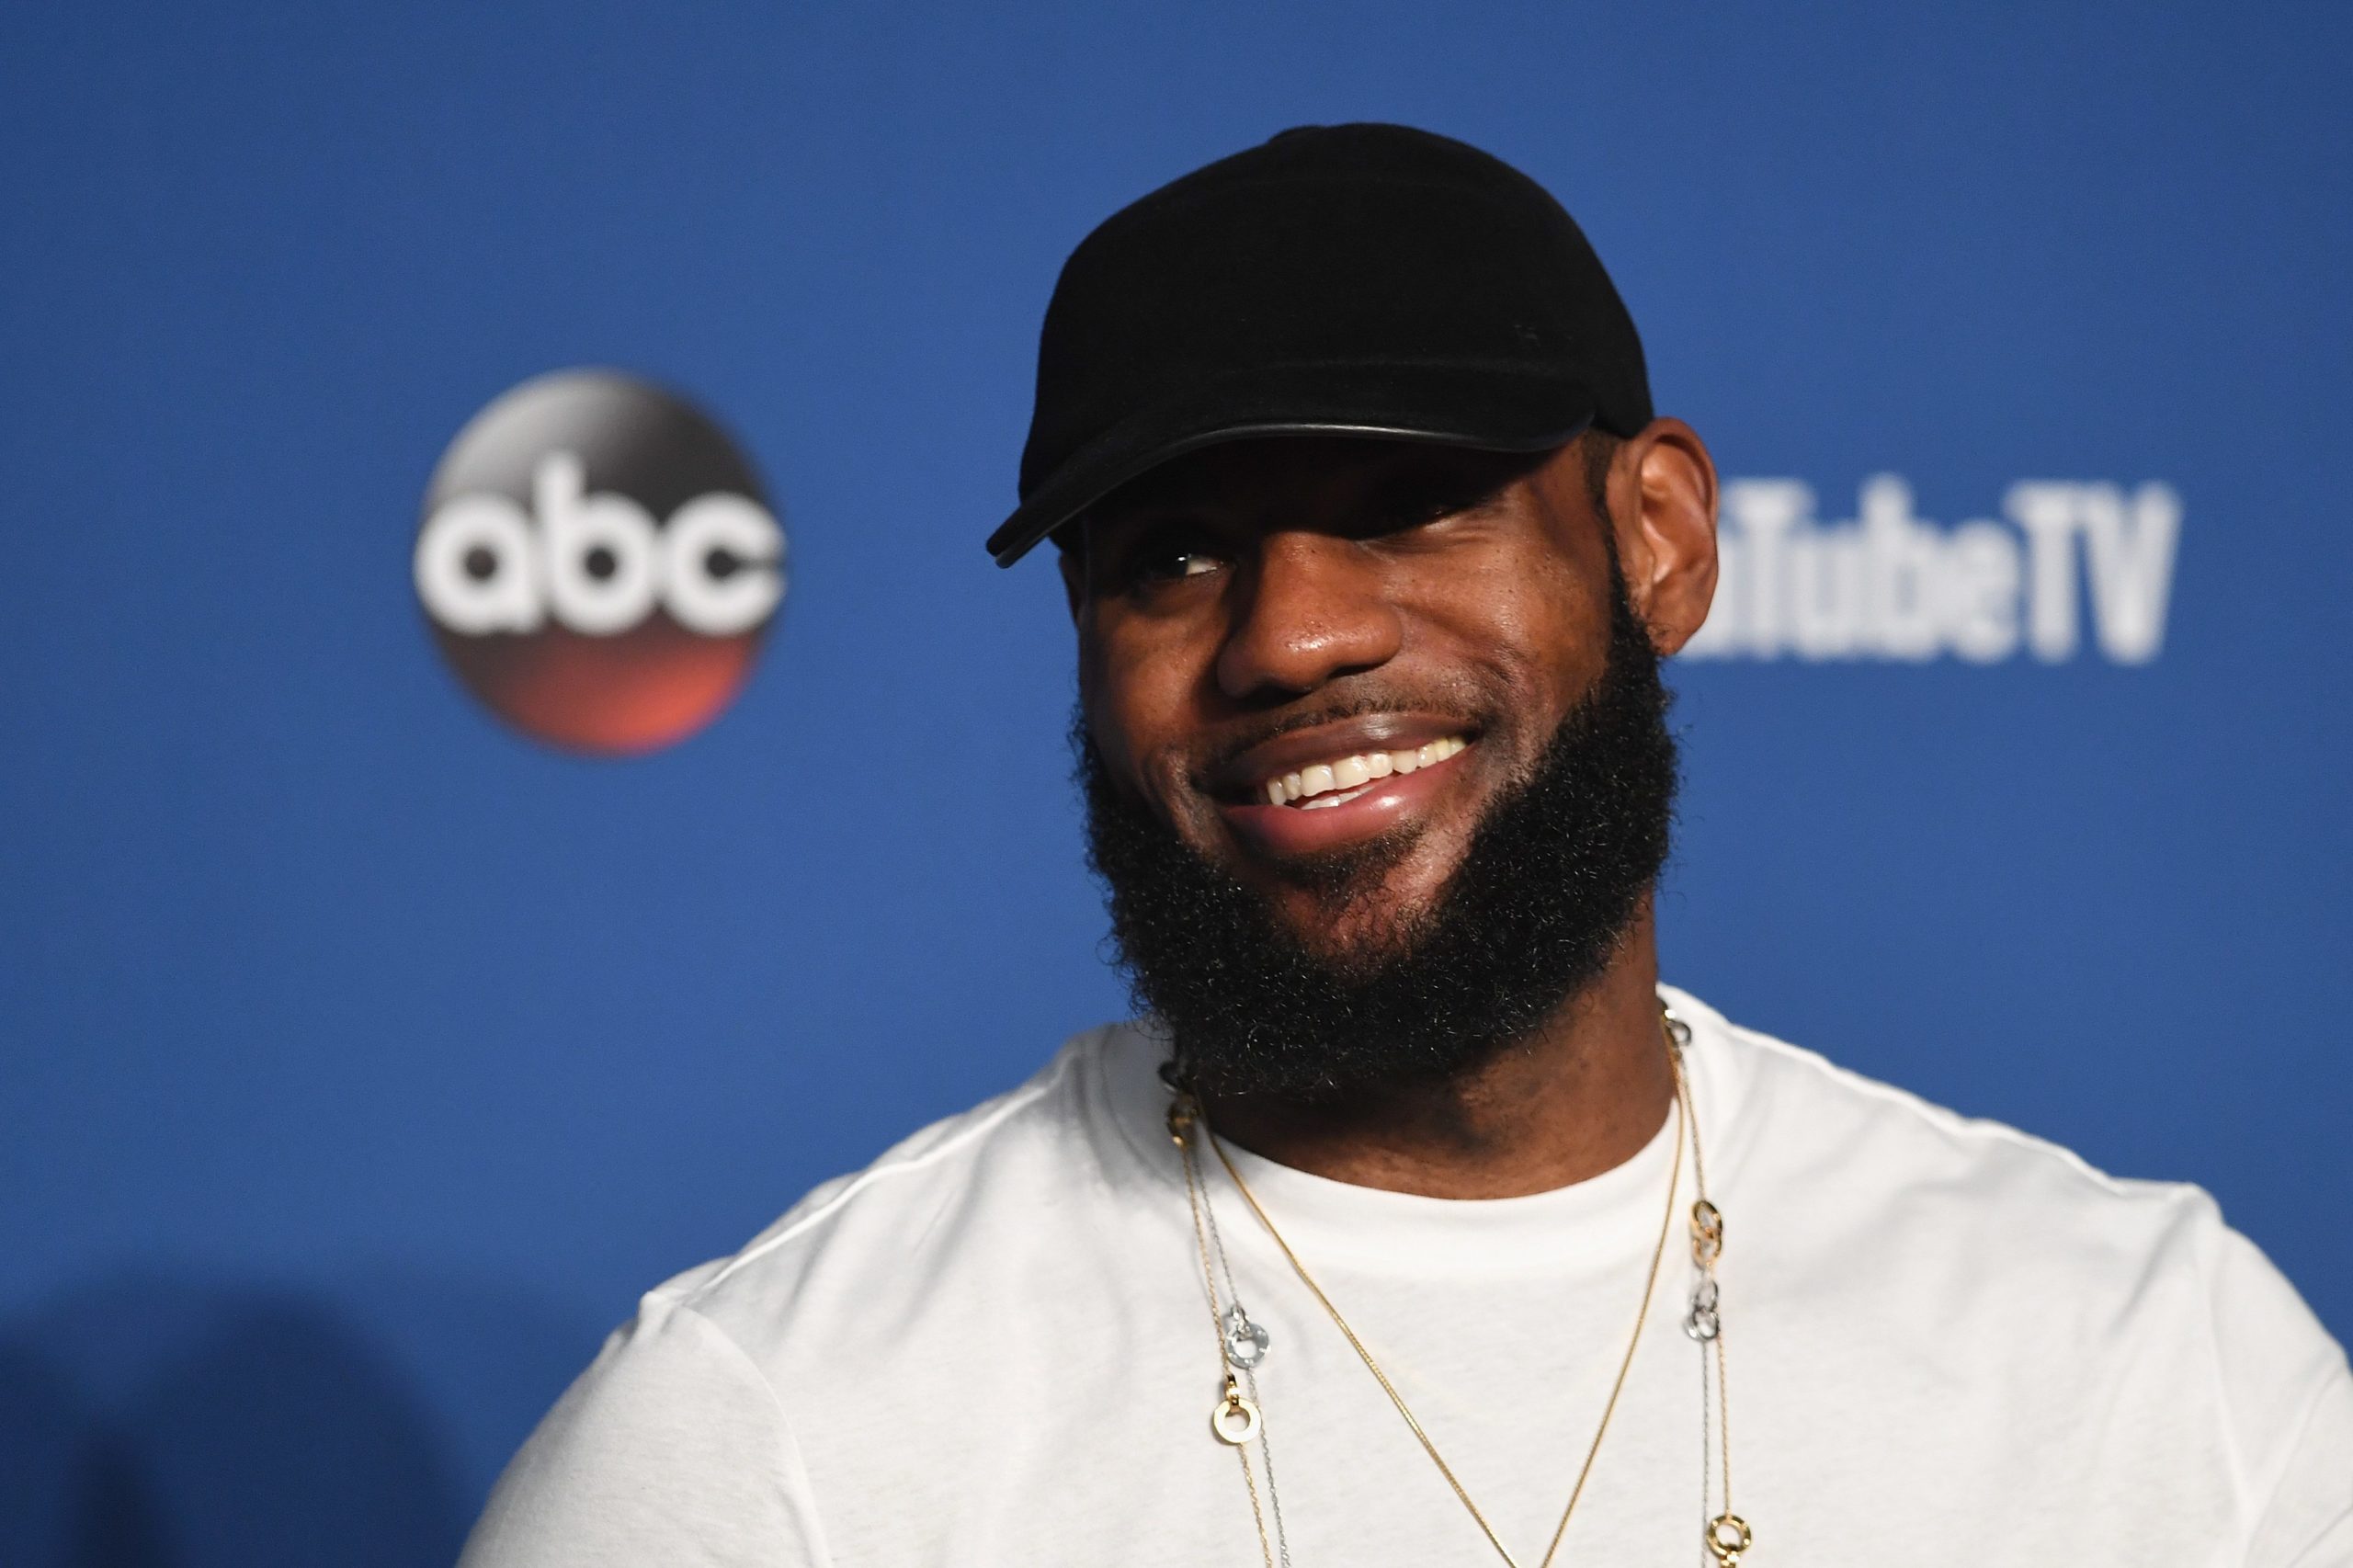 LeBron James Shares He Had To Adjust To Being Around White People During His High School Days